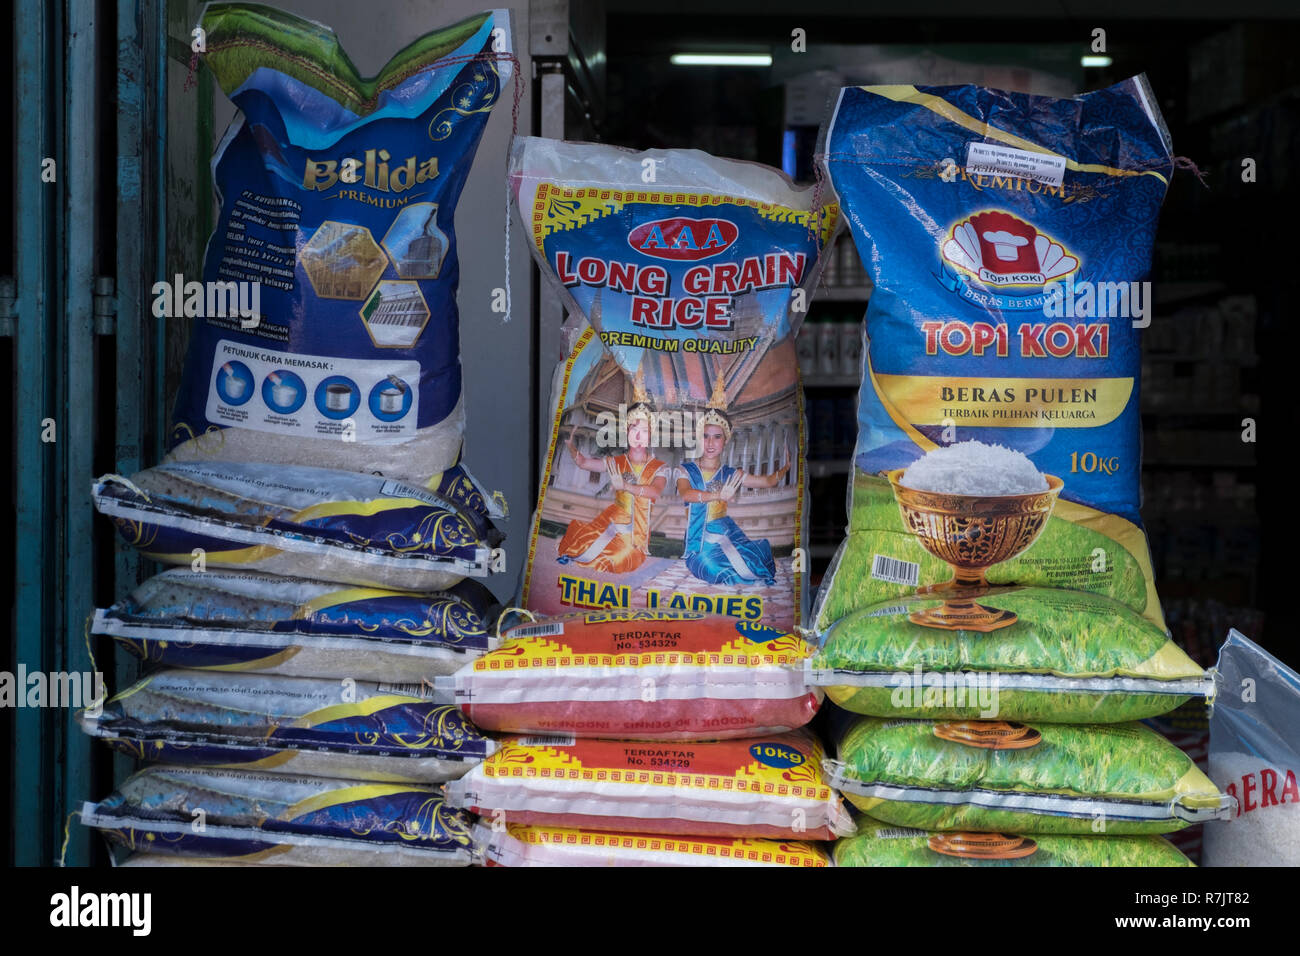 A variety of rice for sale in Pekanbaru, Indonesia Stock Photo